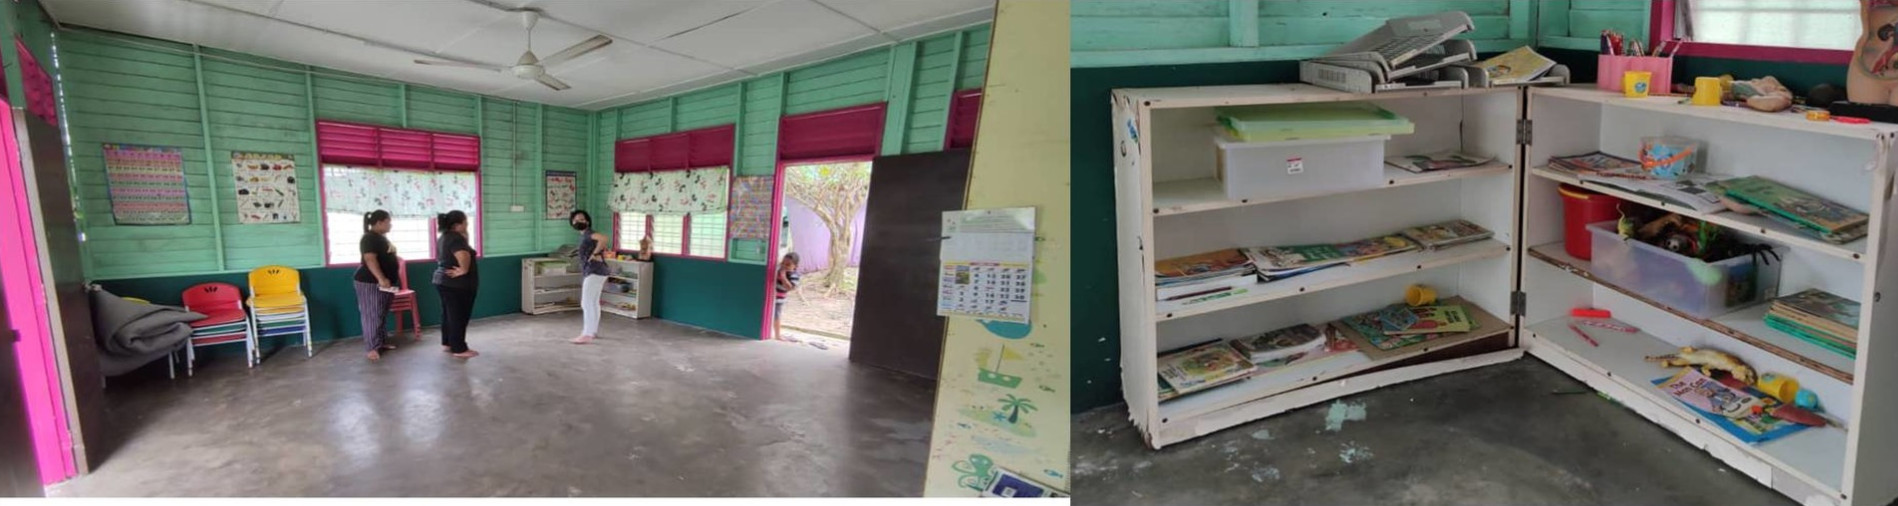 Equipping a Kids' Learning Centre @ Kg Orang Asli Kuang